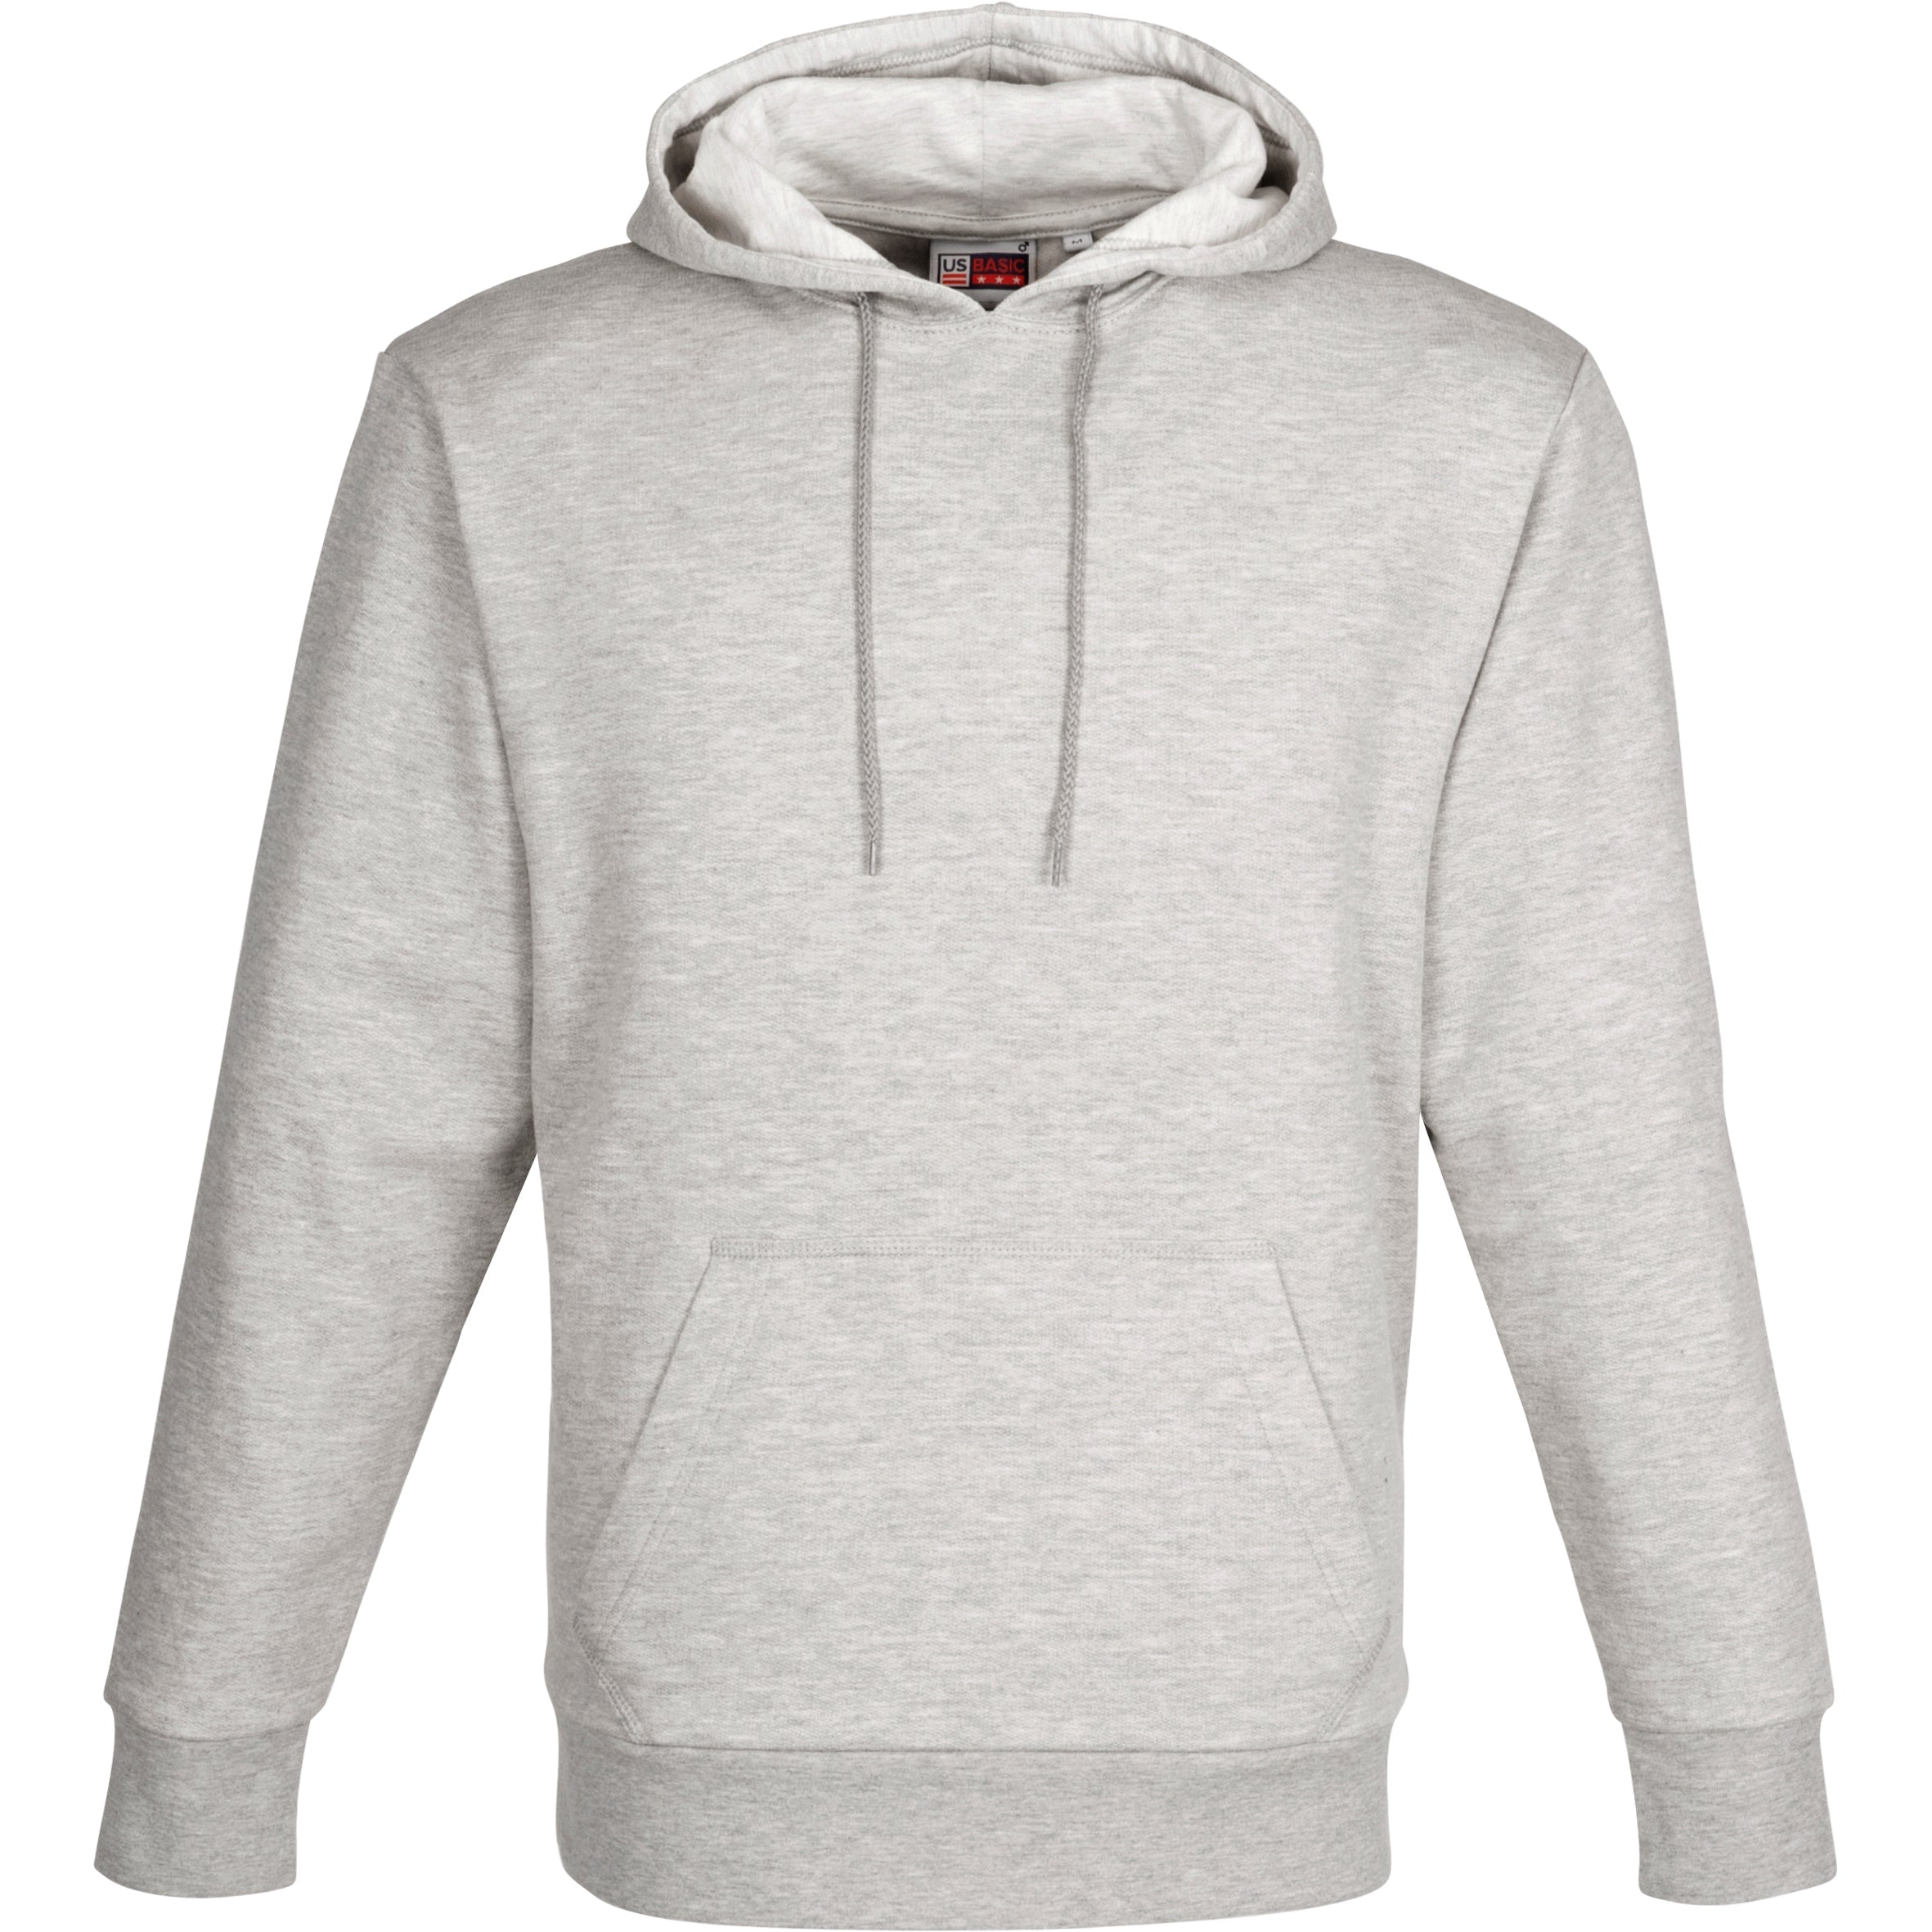 Mens Omega Hooded Sweater-2XL-Grey-GY